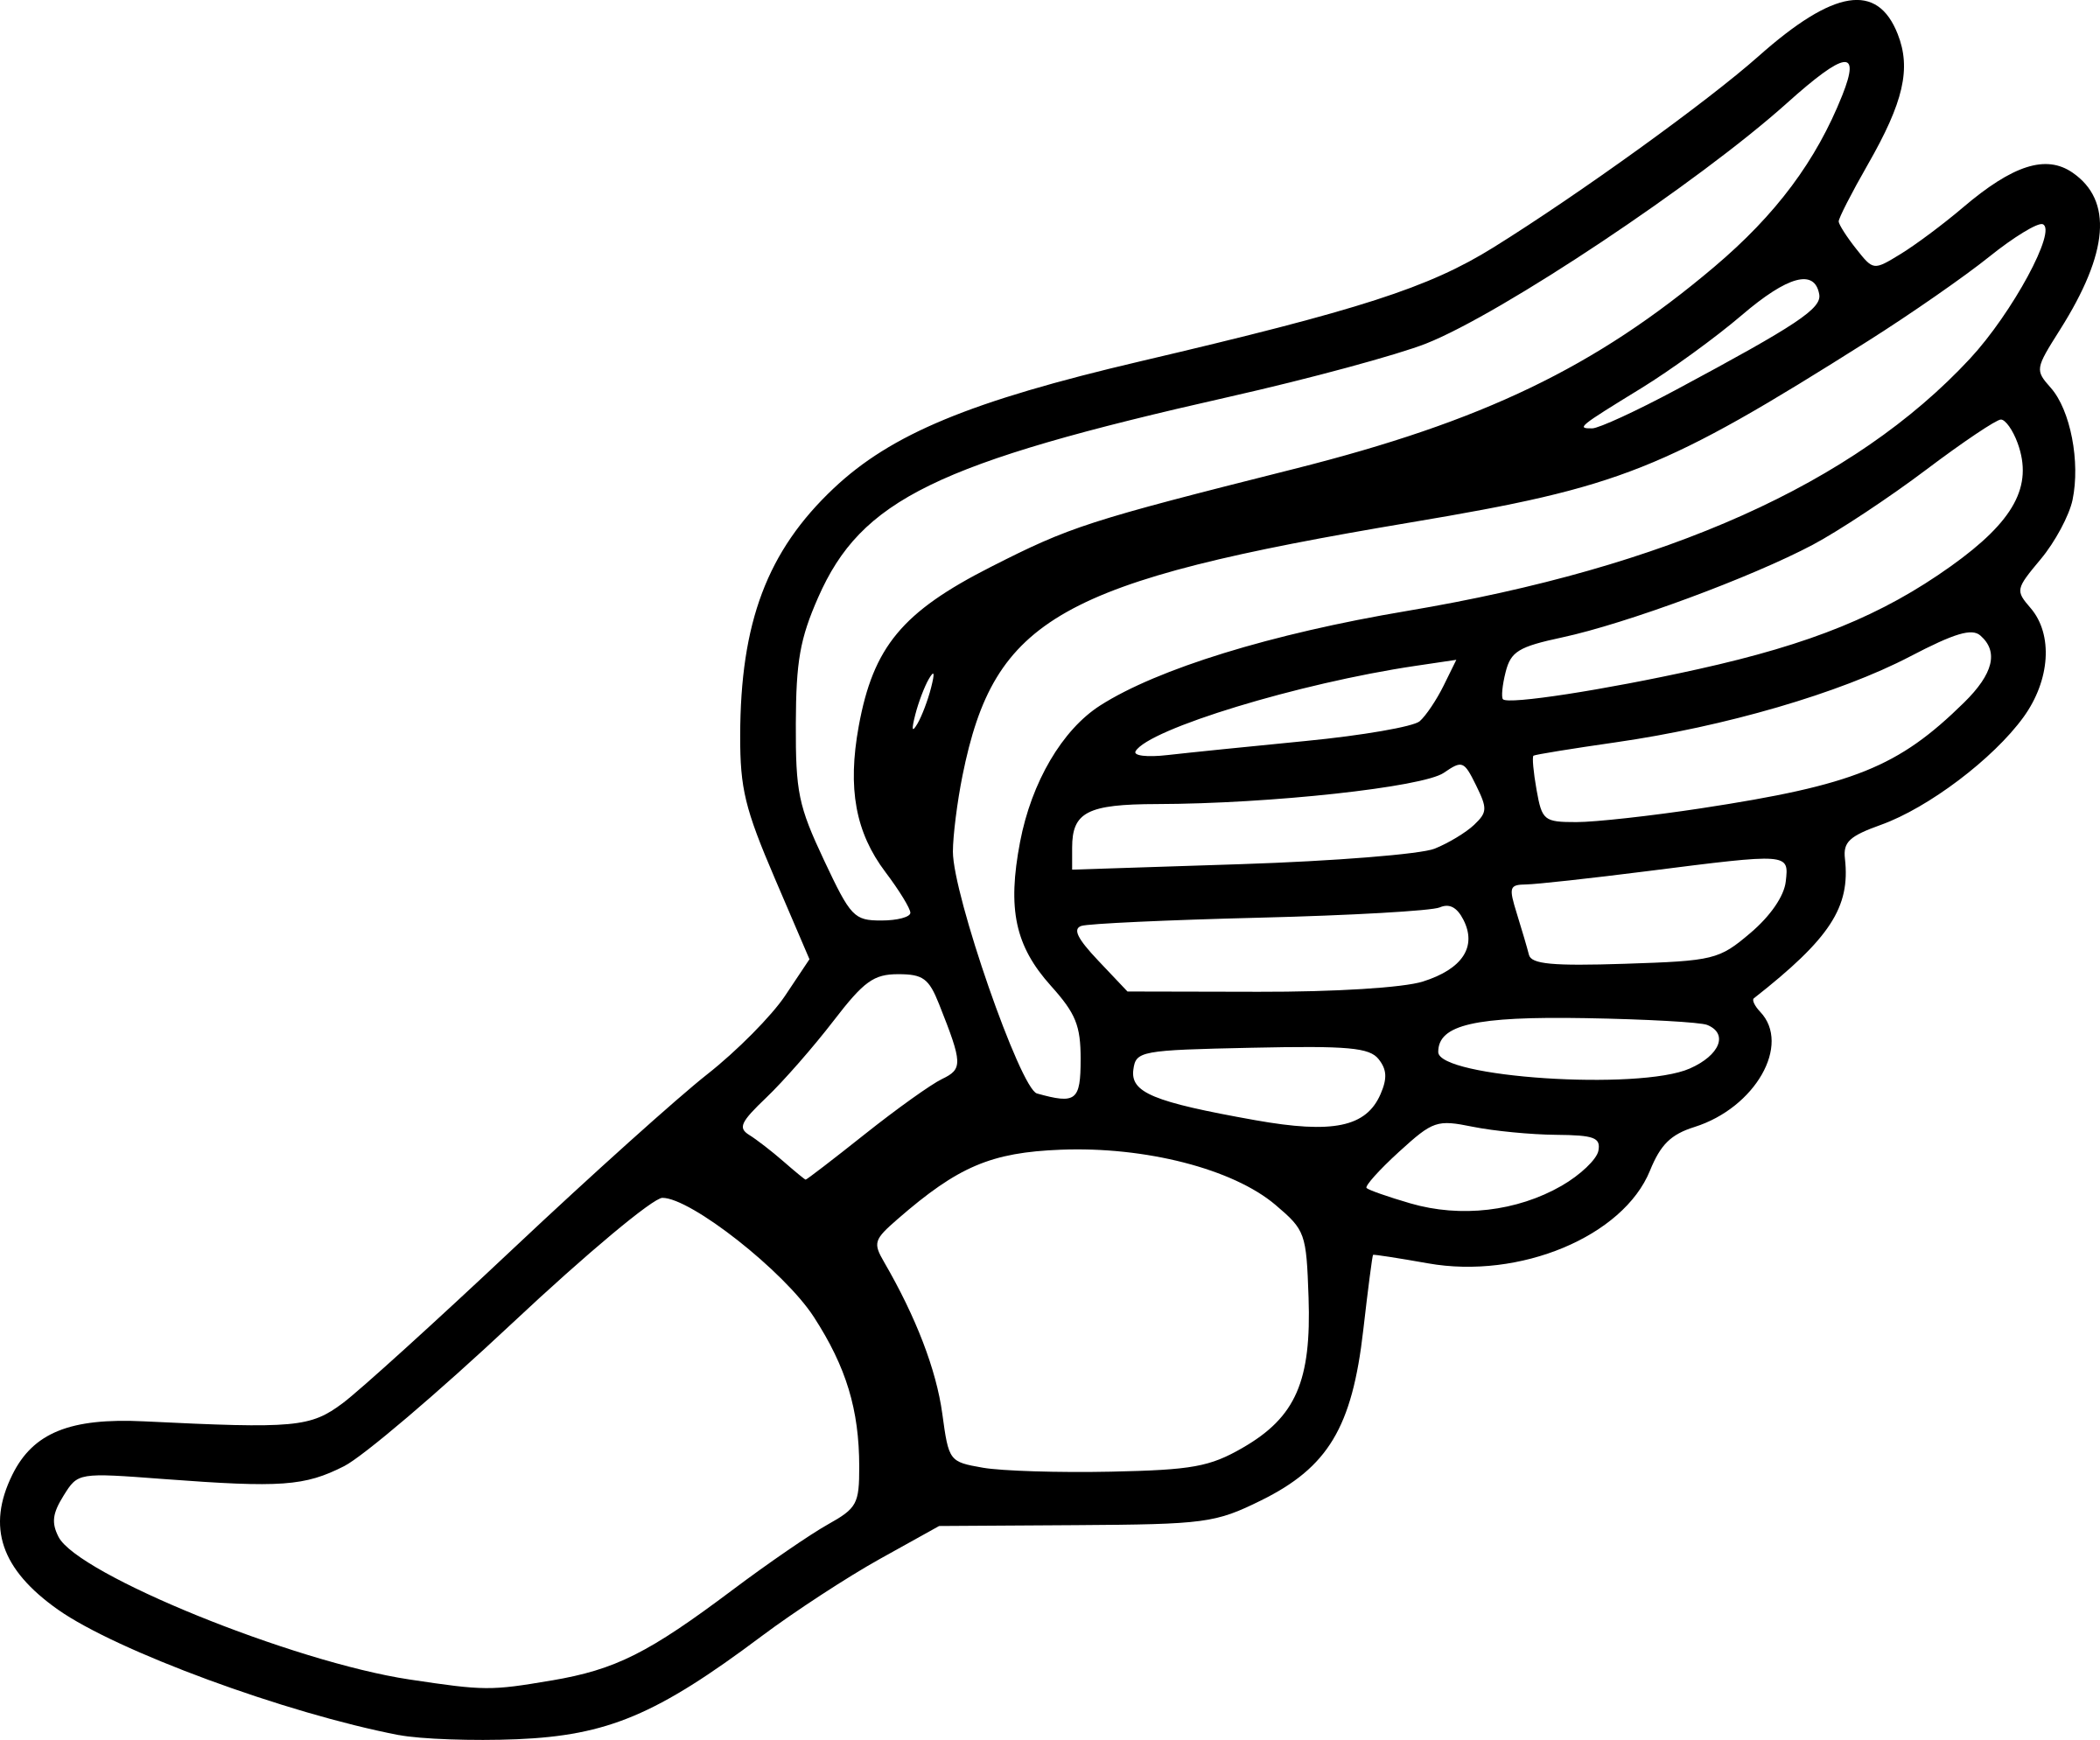 Flying Foot Logo - Winged Foot Logo Group with 64+ items